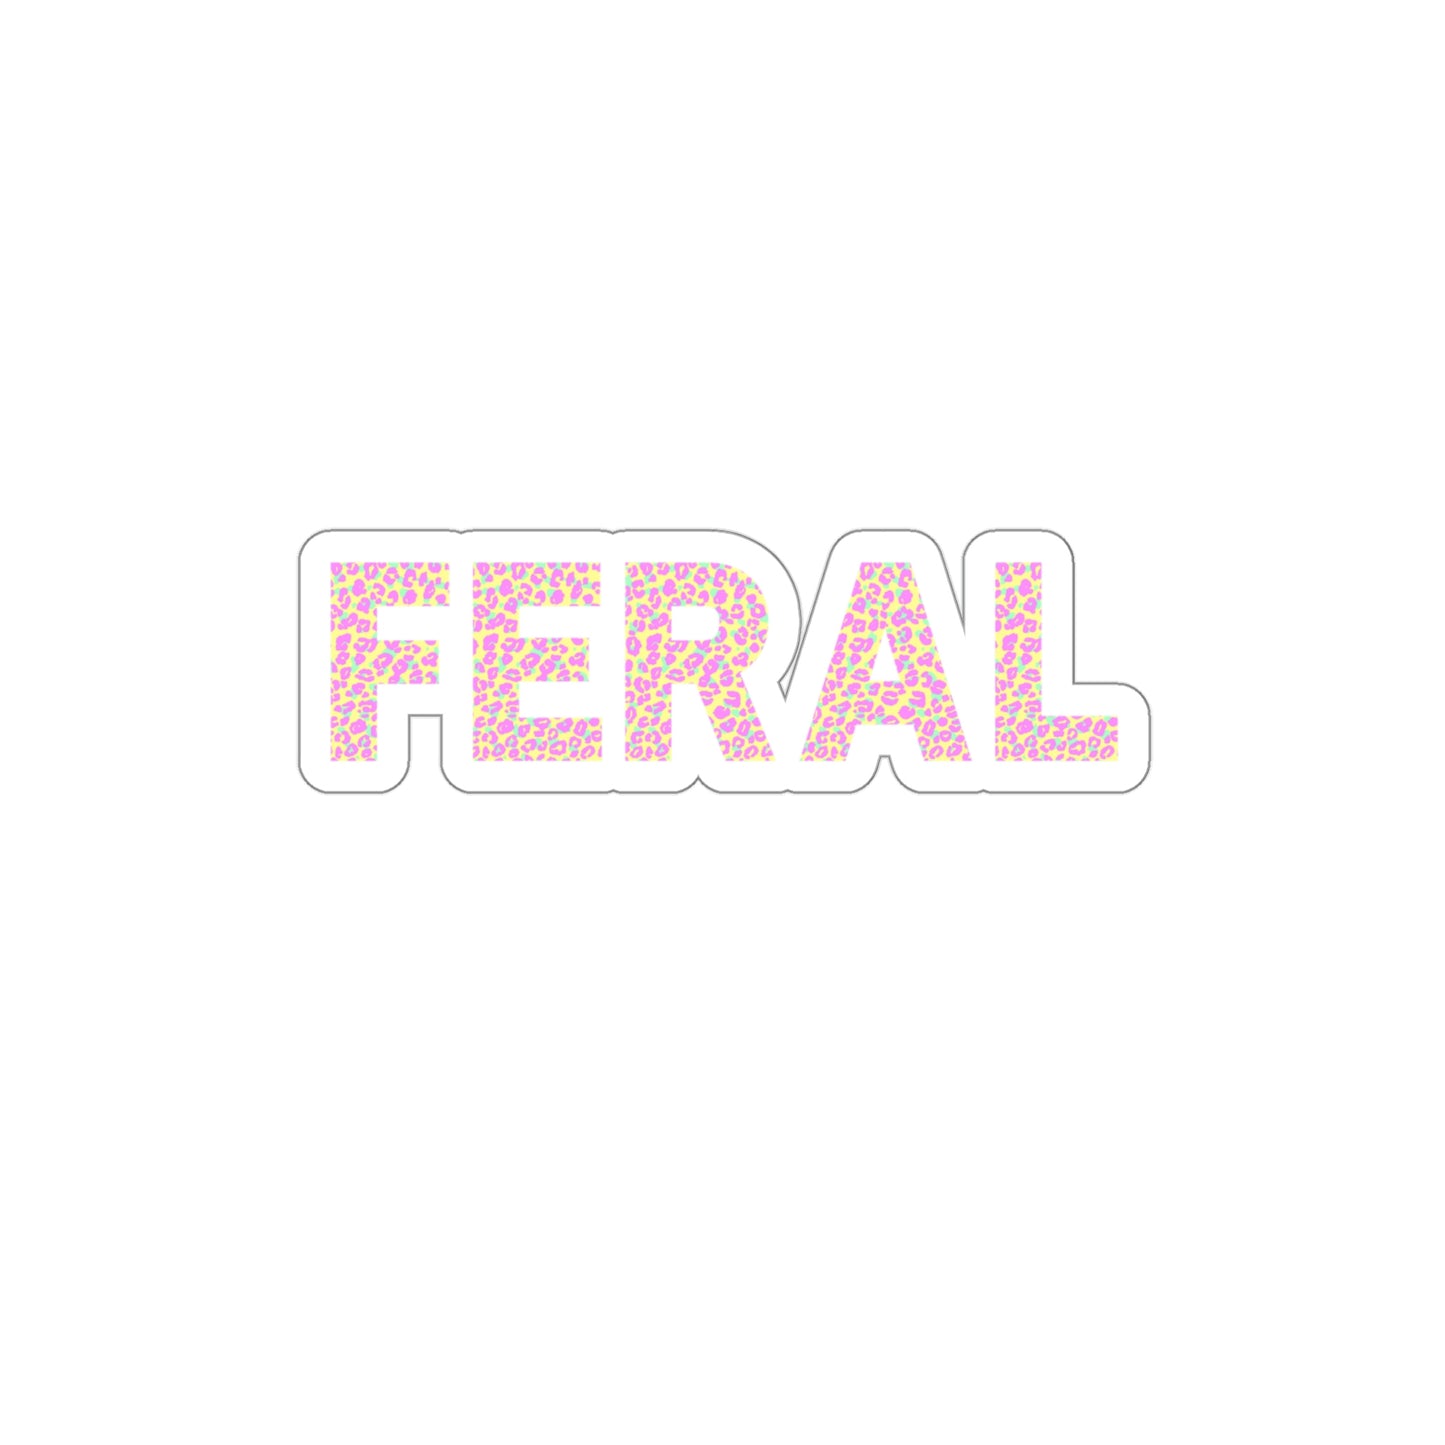 FERAL Stickers